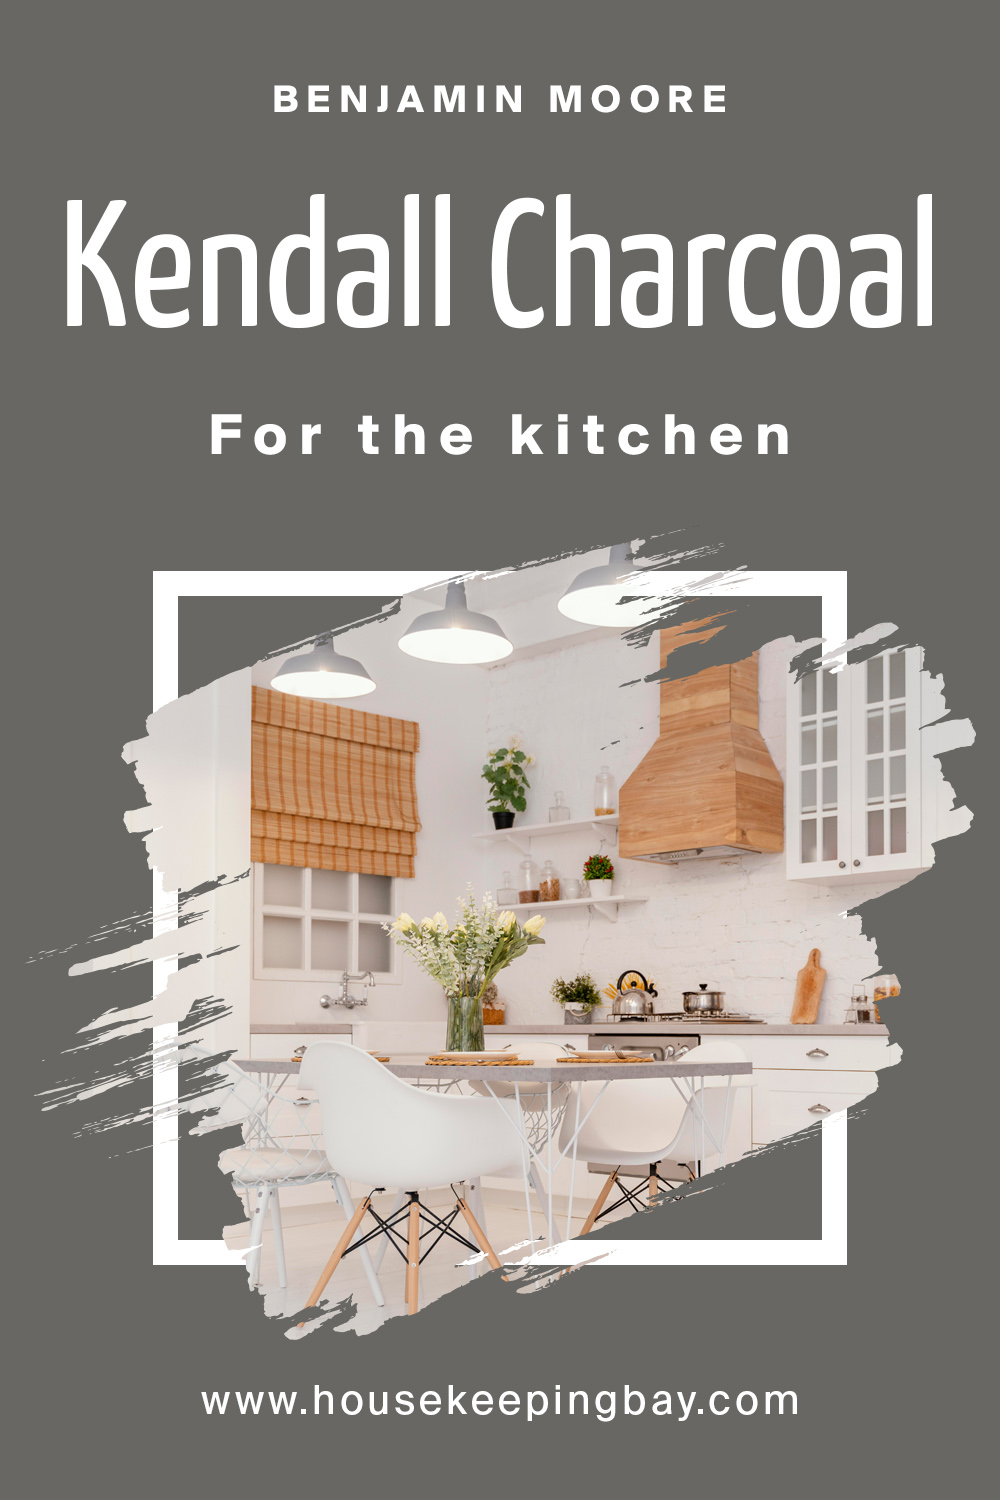 kendall charcoal for the kitchen